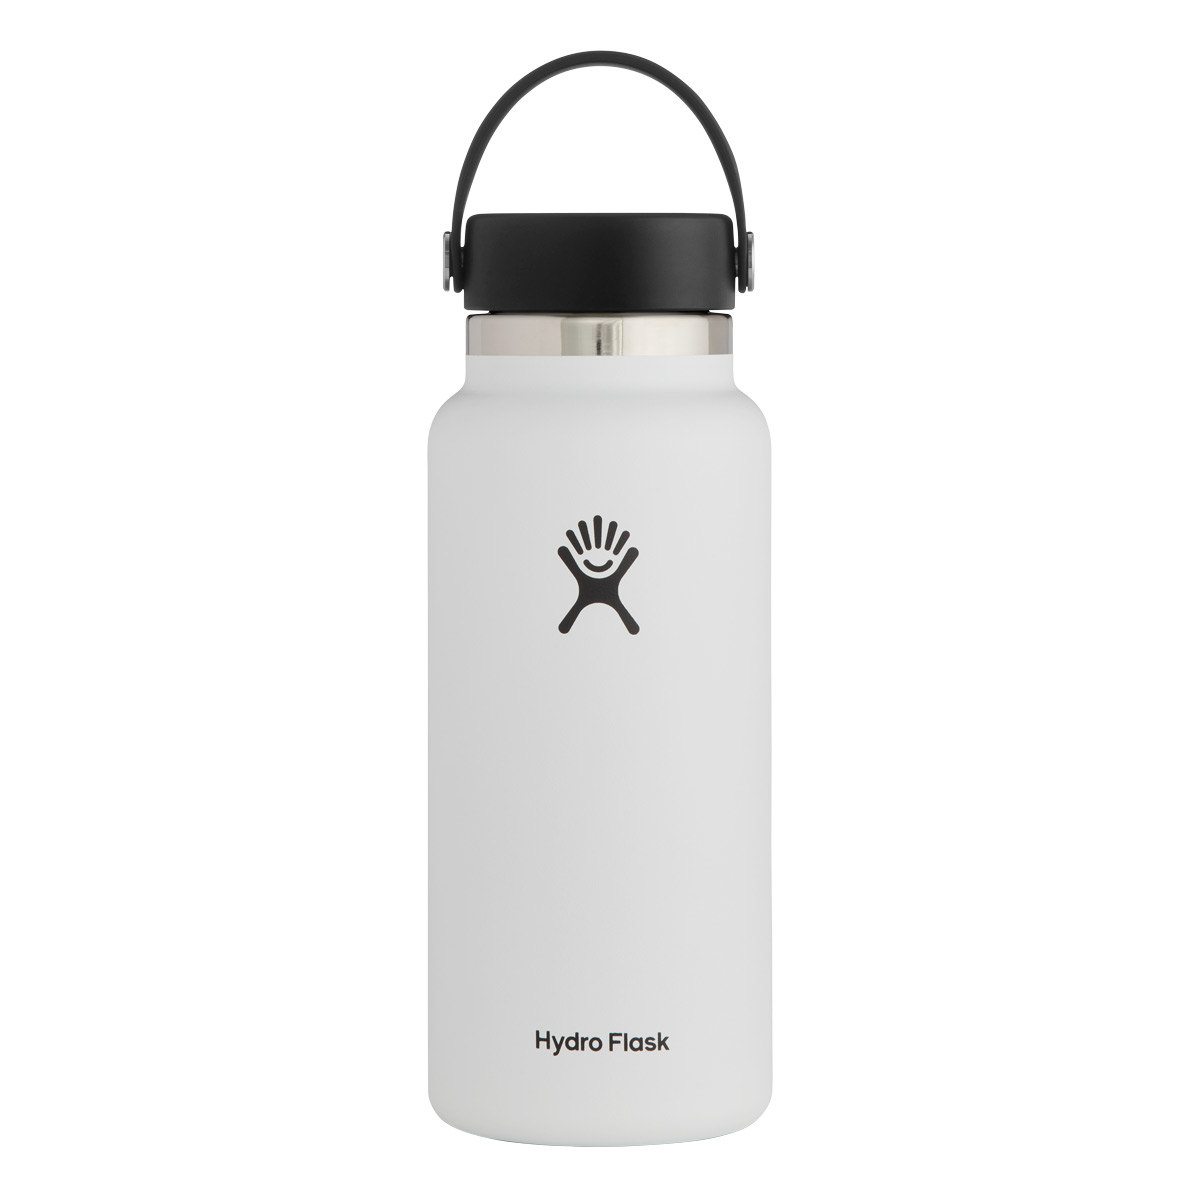 https://www.containerstore.com/catalogimages/383500/10080419-Hydro-Flask-32-oz-Wide-Mout.jpg